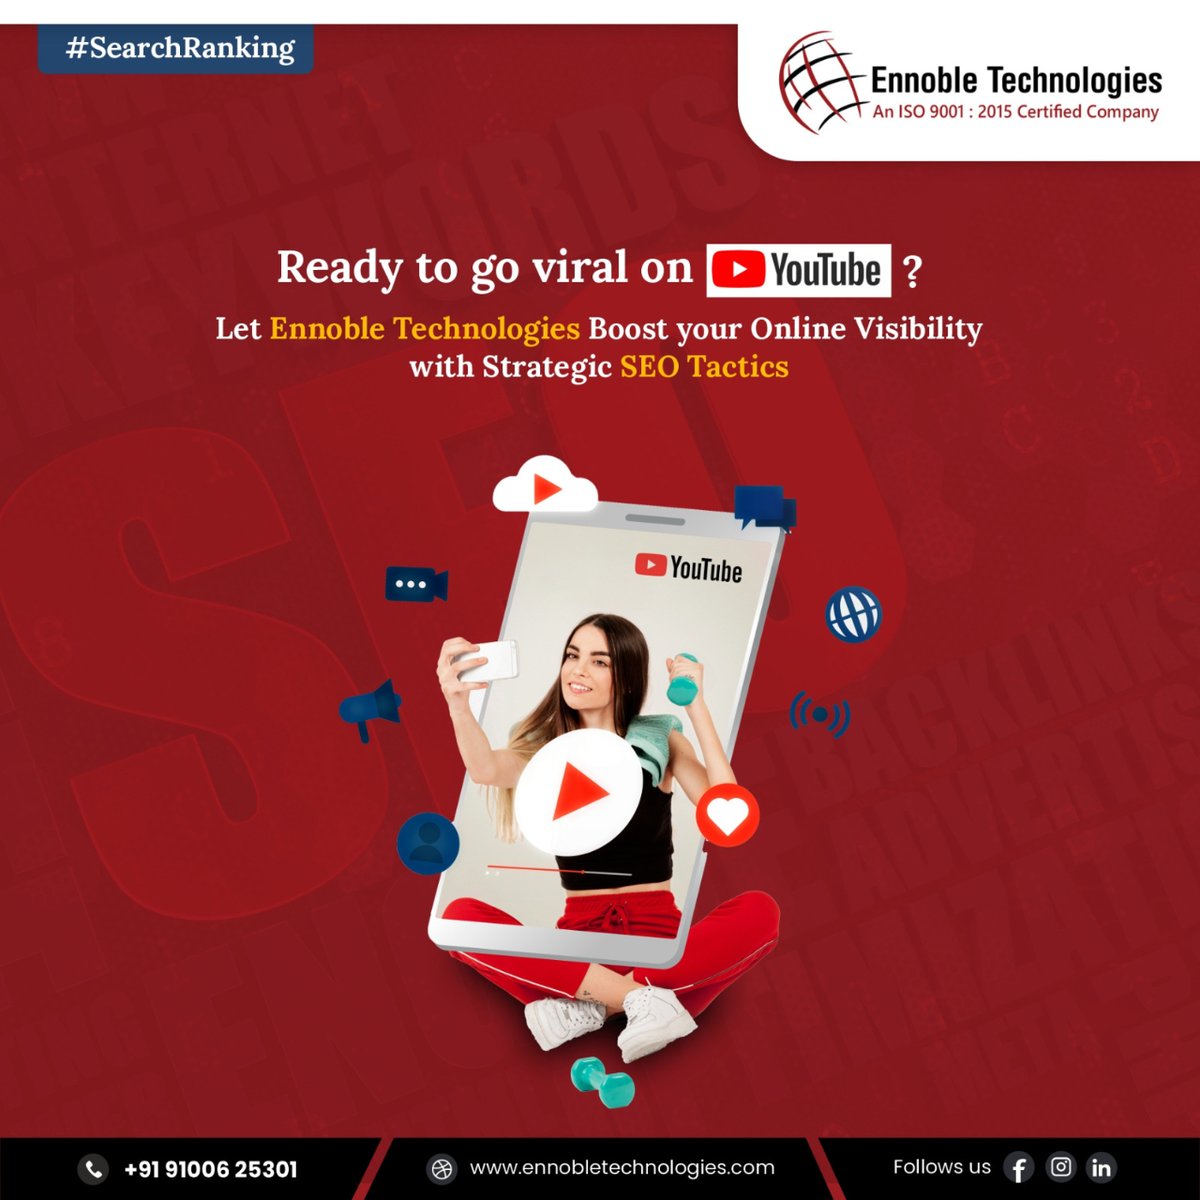 Ready to go viral on YouTube?🎥

Let Ennoble Technologies boost your online visibility with strategic SEO tactics!🚀

☎️Tel: +91-9100625301
👉Visit: ennobletechnologies.com
📧Email us: info@ennobletechnologies.com

#SEO #SearchRanking #YouTubeMarketing #EnnobleTechnologies